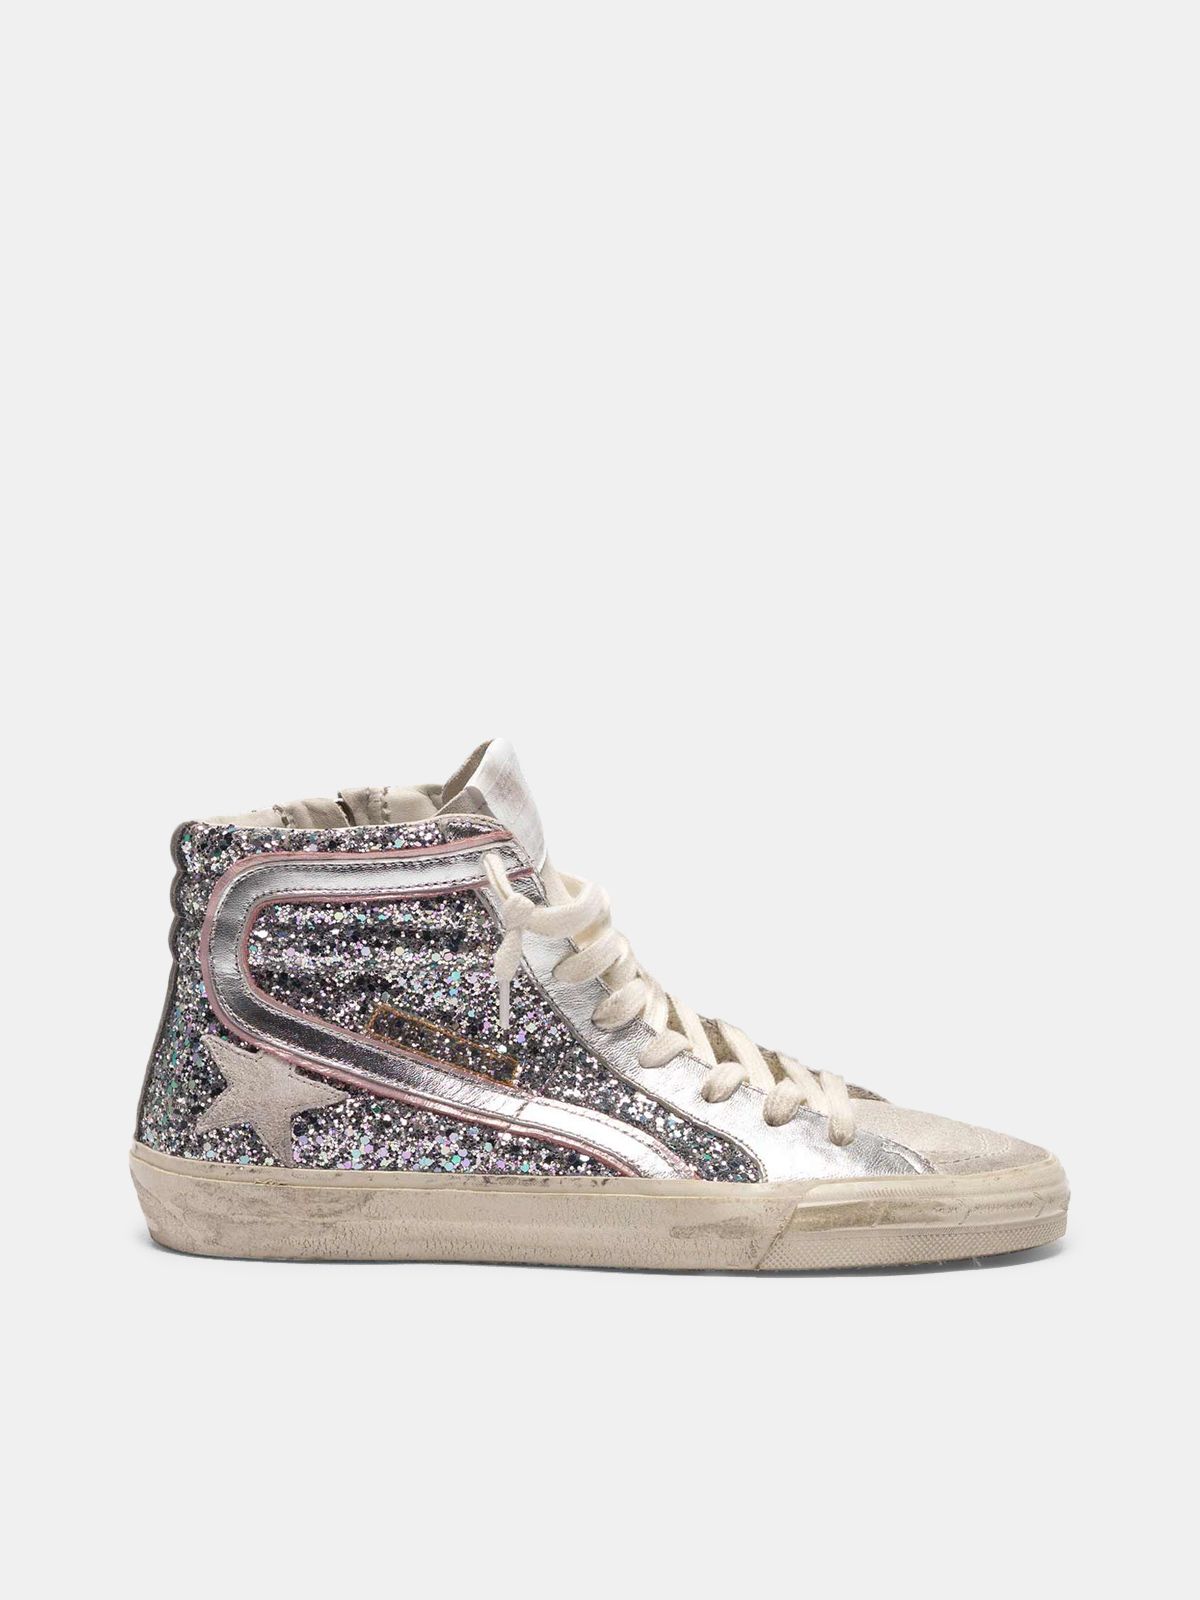 golden goose sneakers in Slide glitter and silver laminated leather